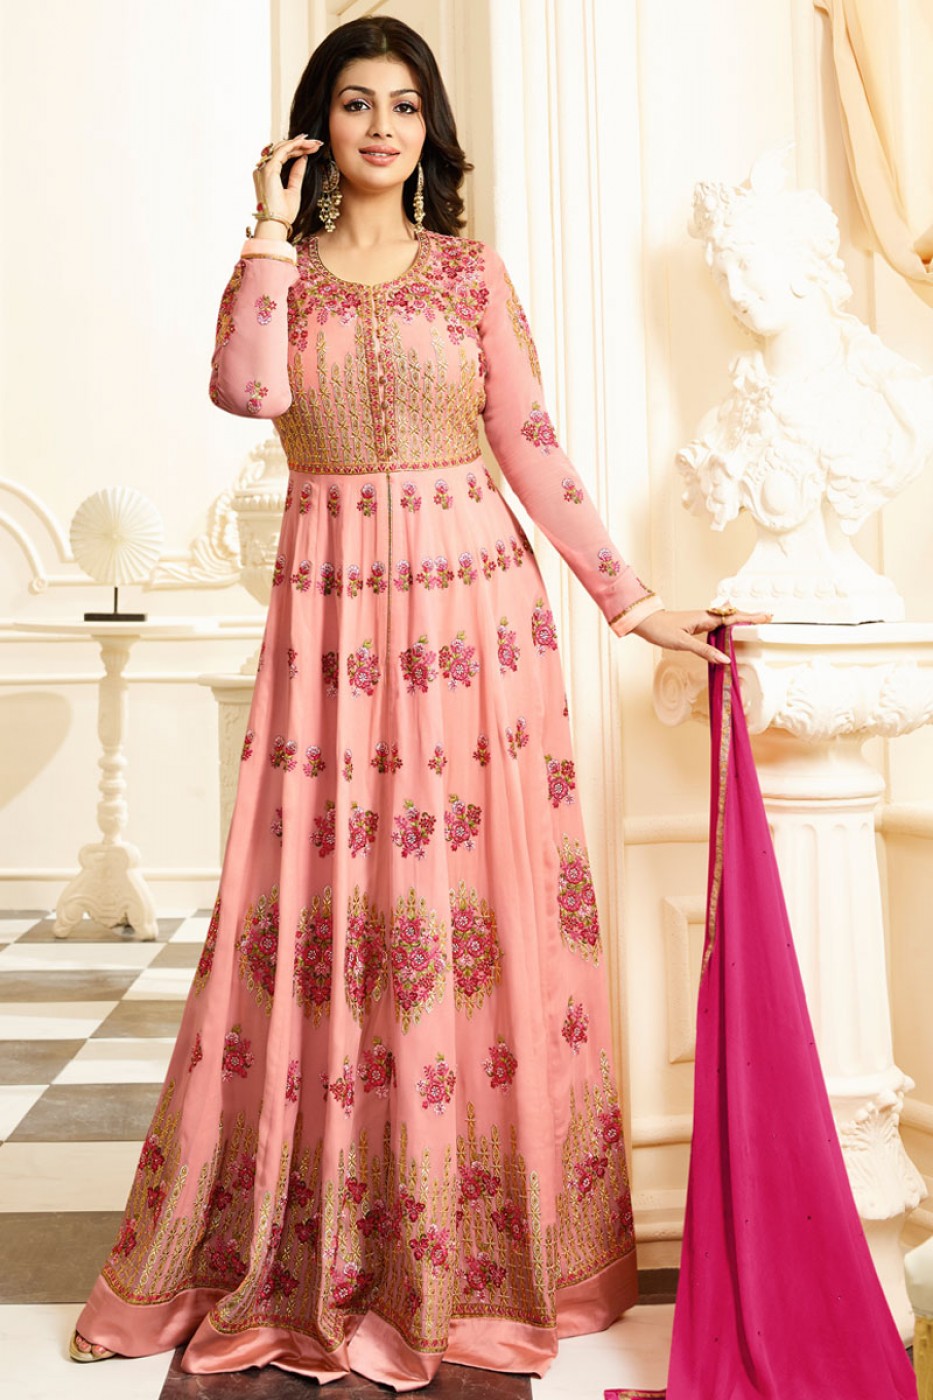 Buy Ayesha Takia light pink color georgette anarkali in UK, USA and Canada